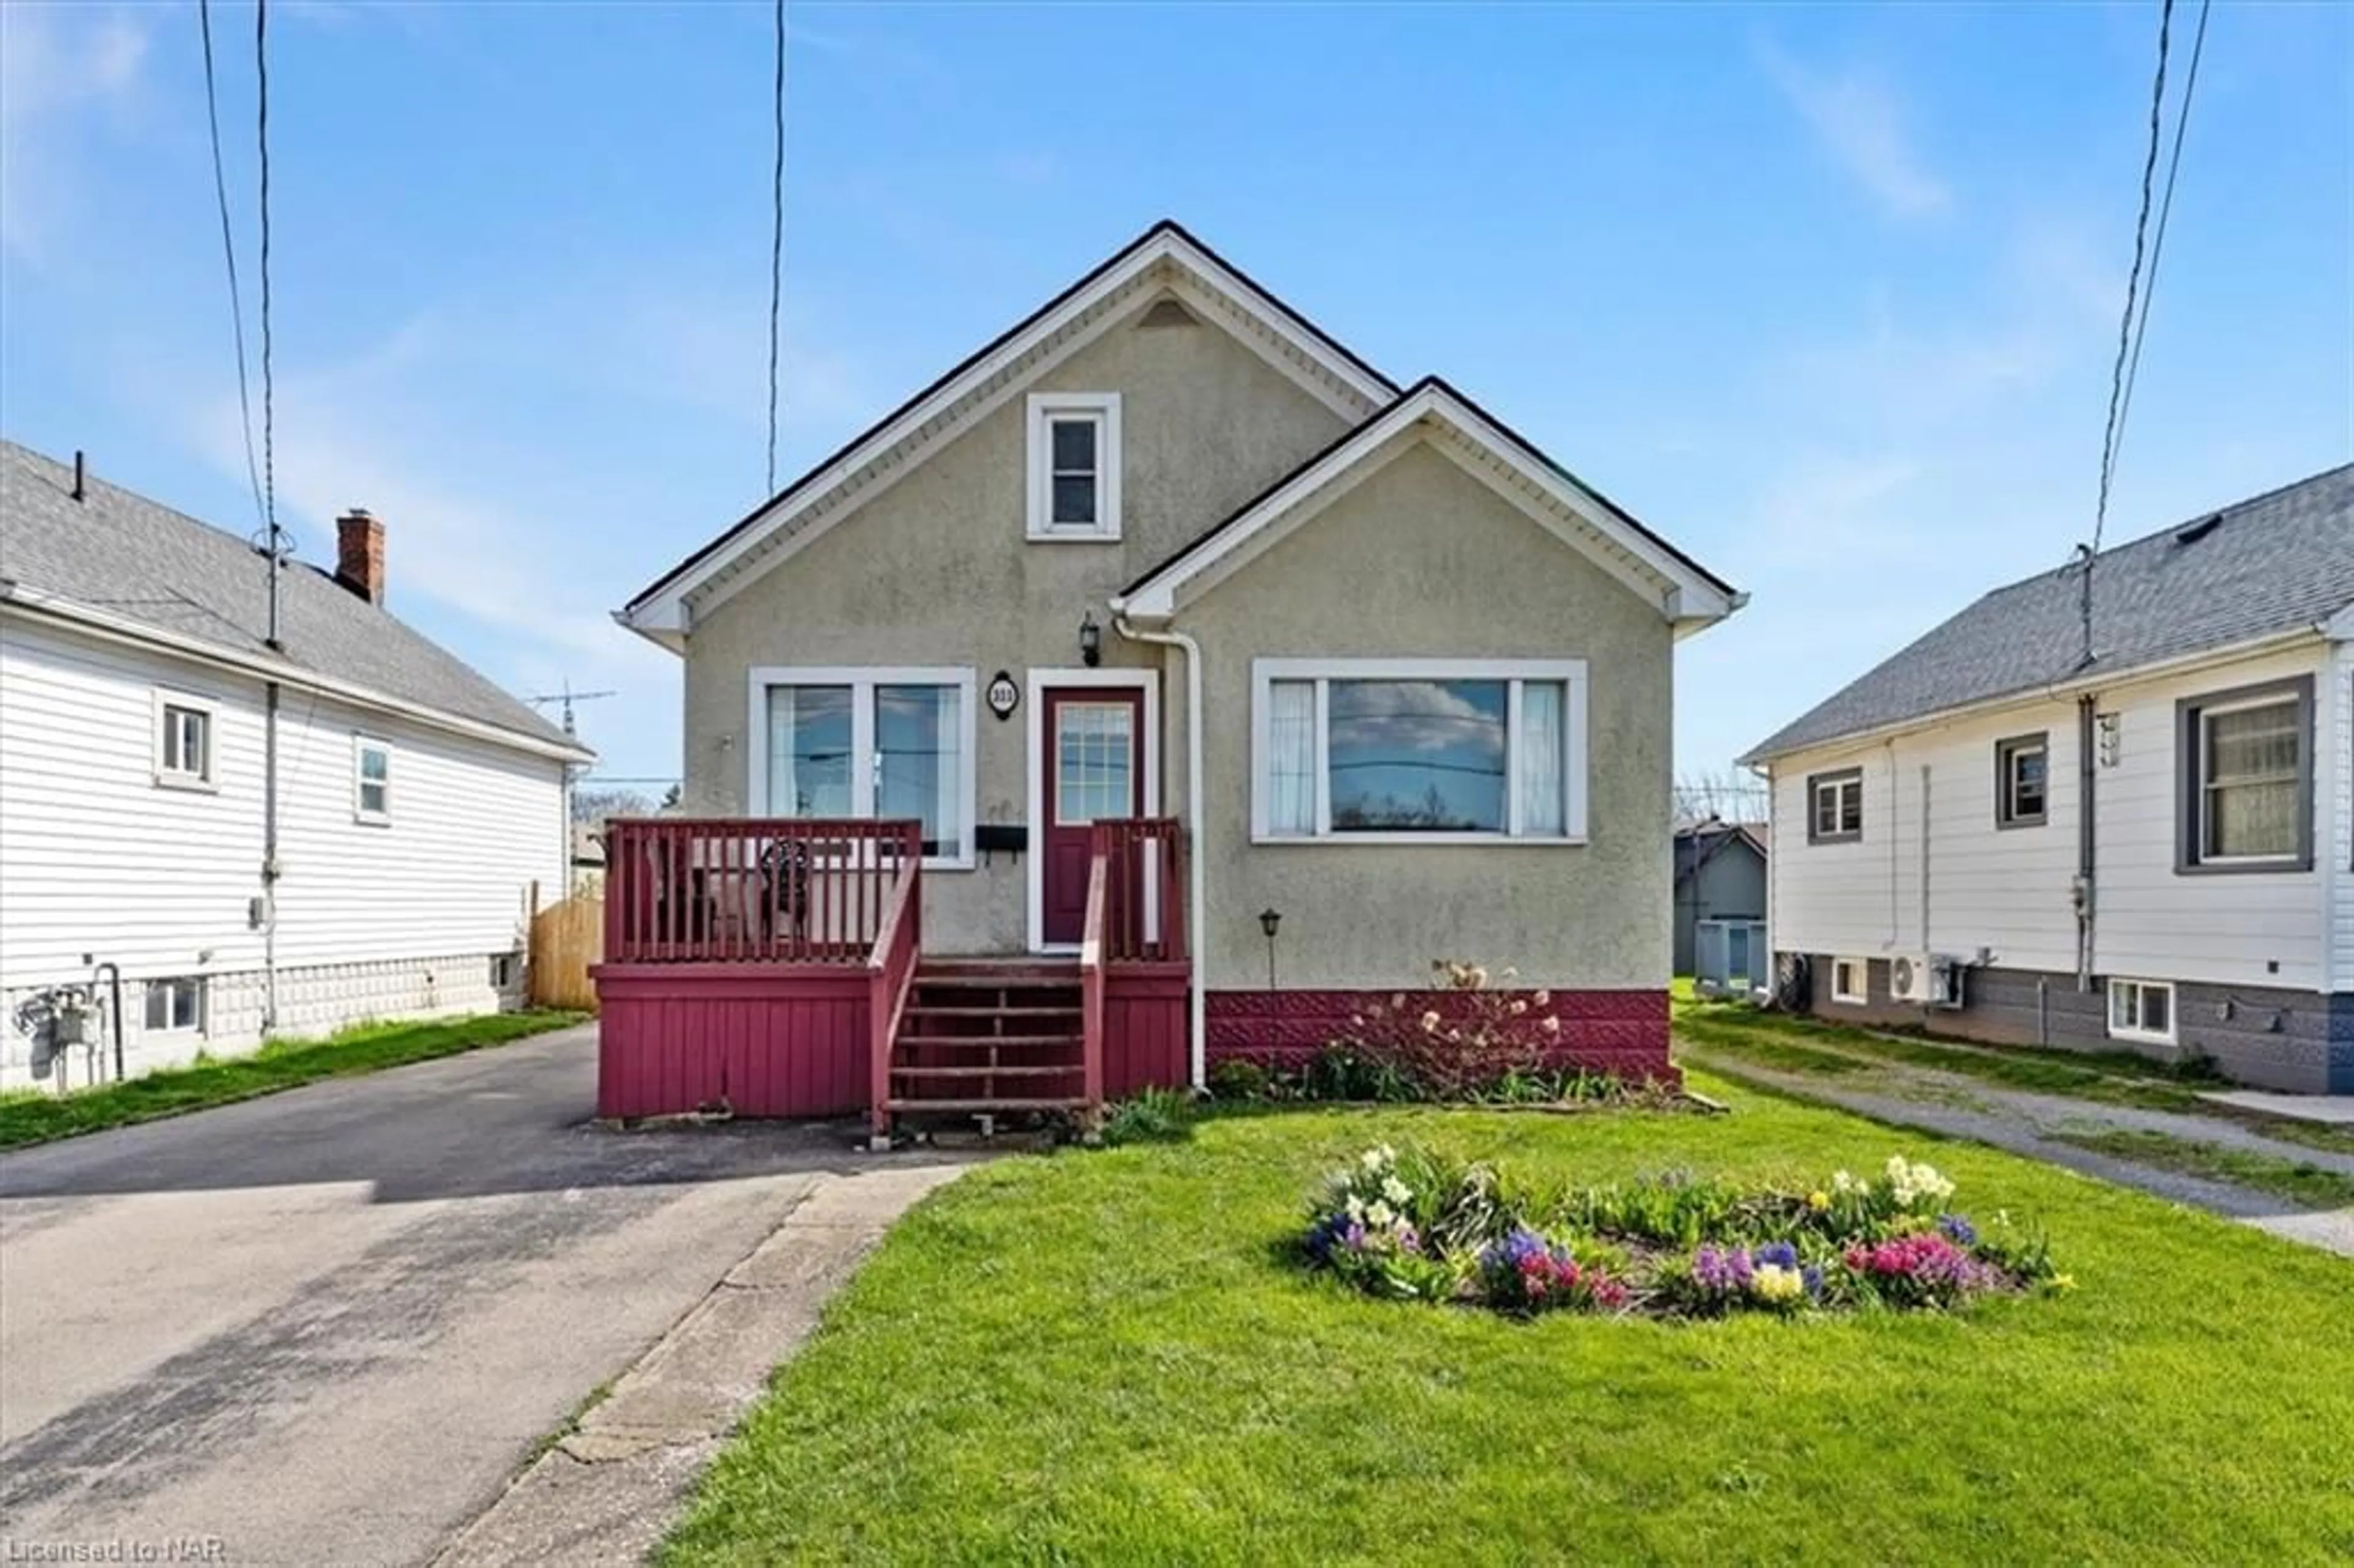 Frontside or backside of a home for 311 Killaly St, Port Colborne Ontario L3K 1P3